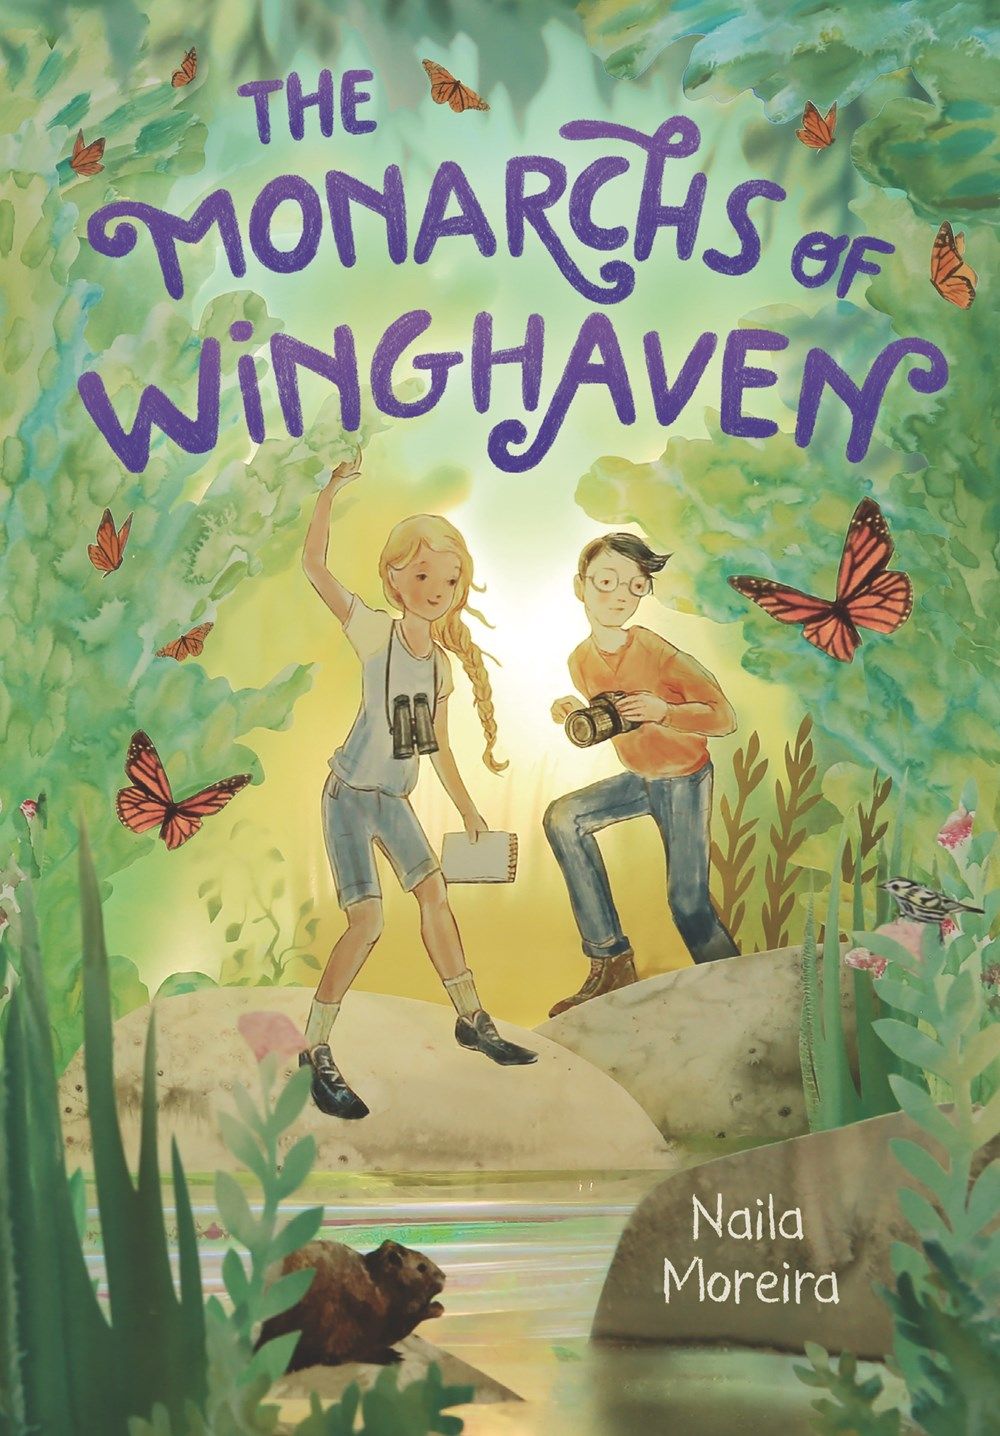 Cover of The Monarchs of Winghaven by Naila Moreira